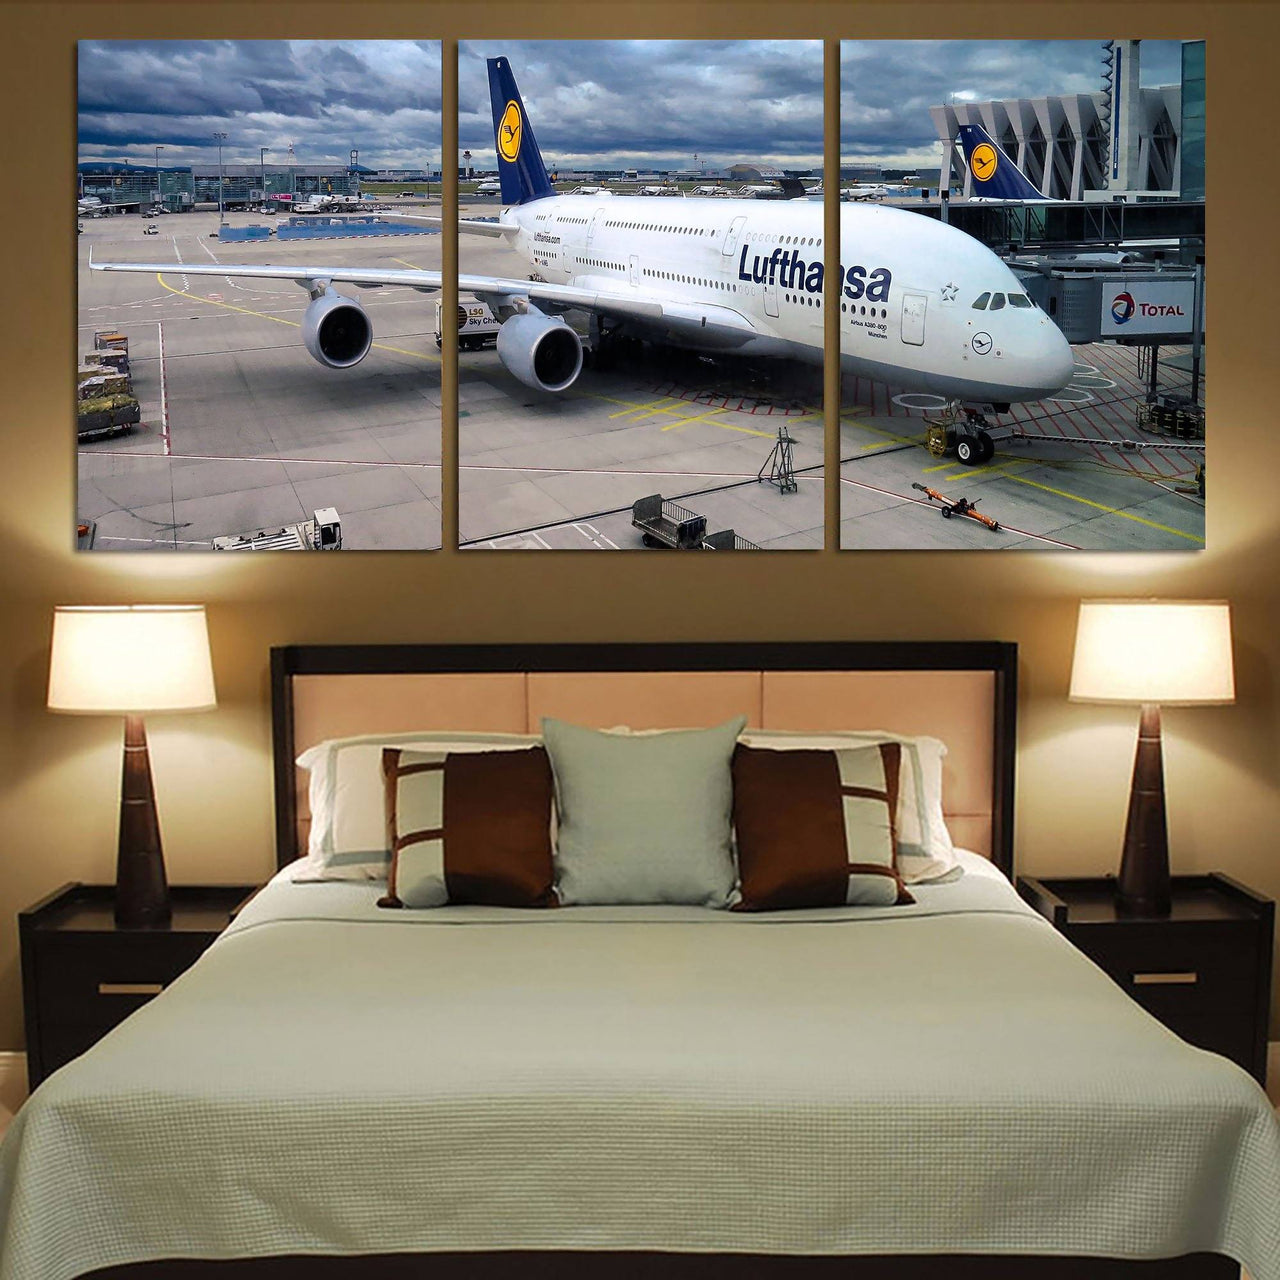 Lufthansa's A380 At the Gate Printed Canvas Posters (3 Pieces) Aviation Shop 